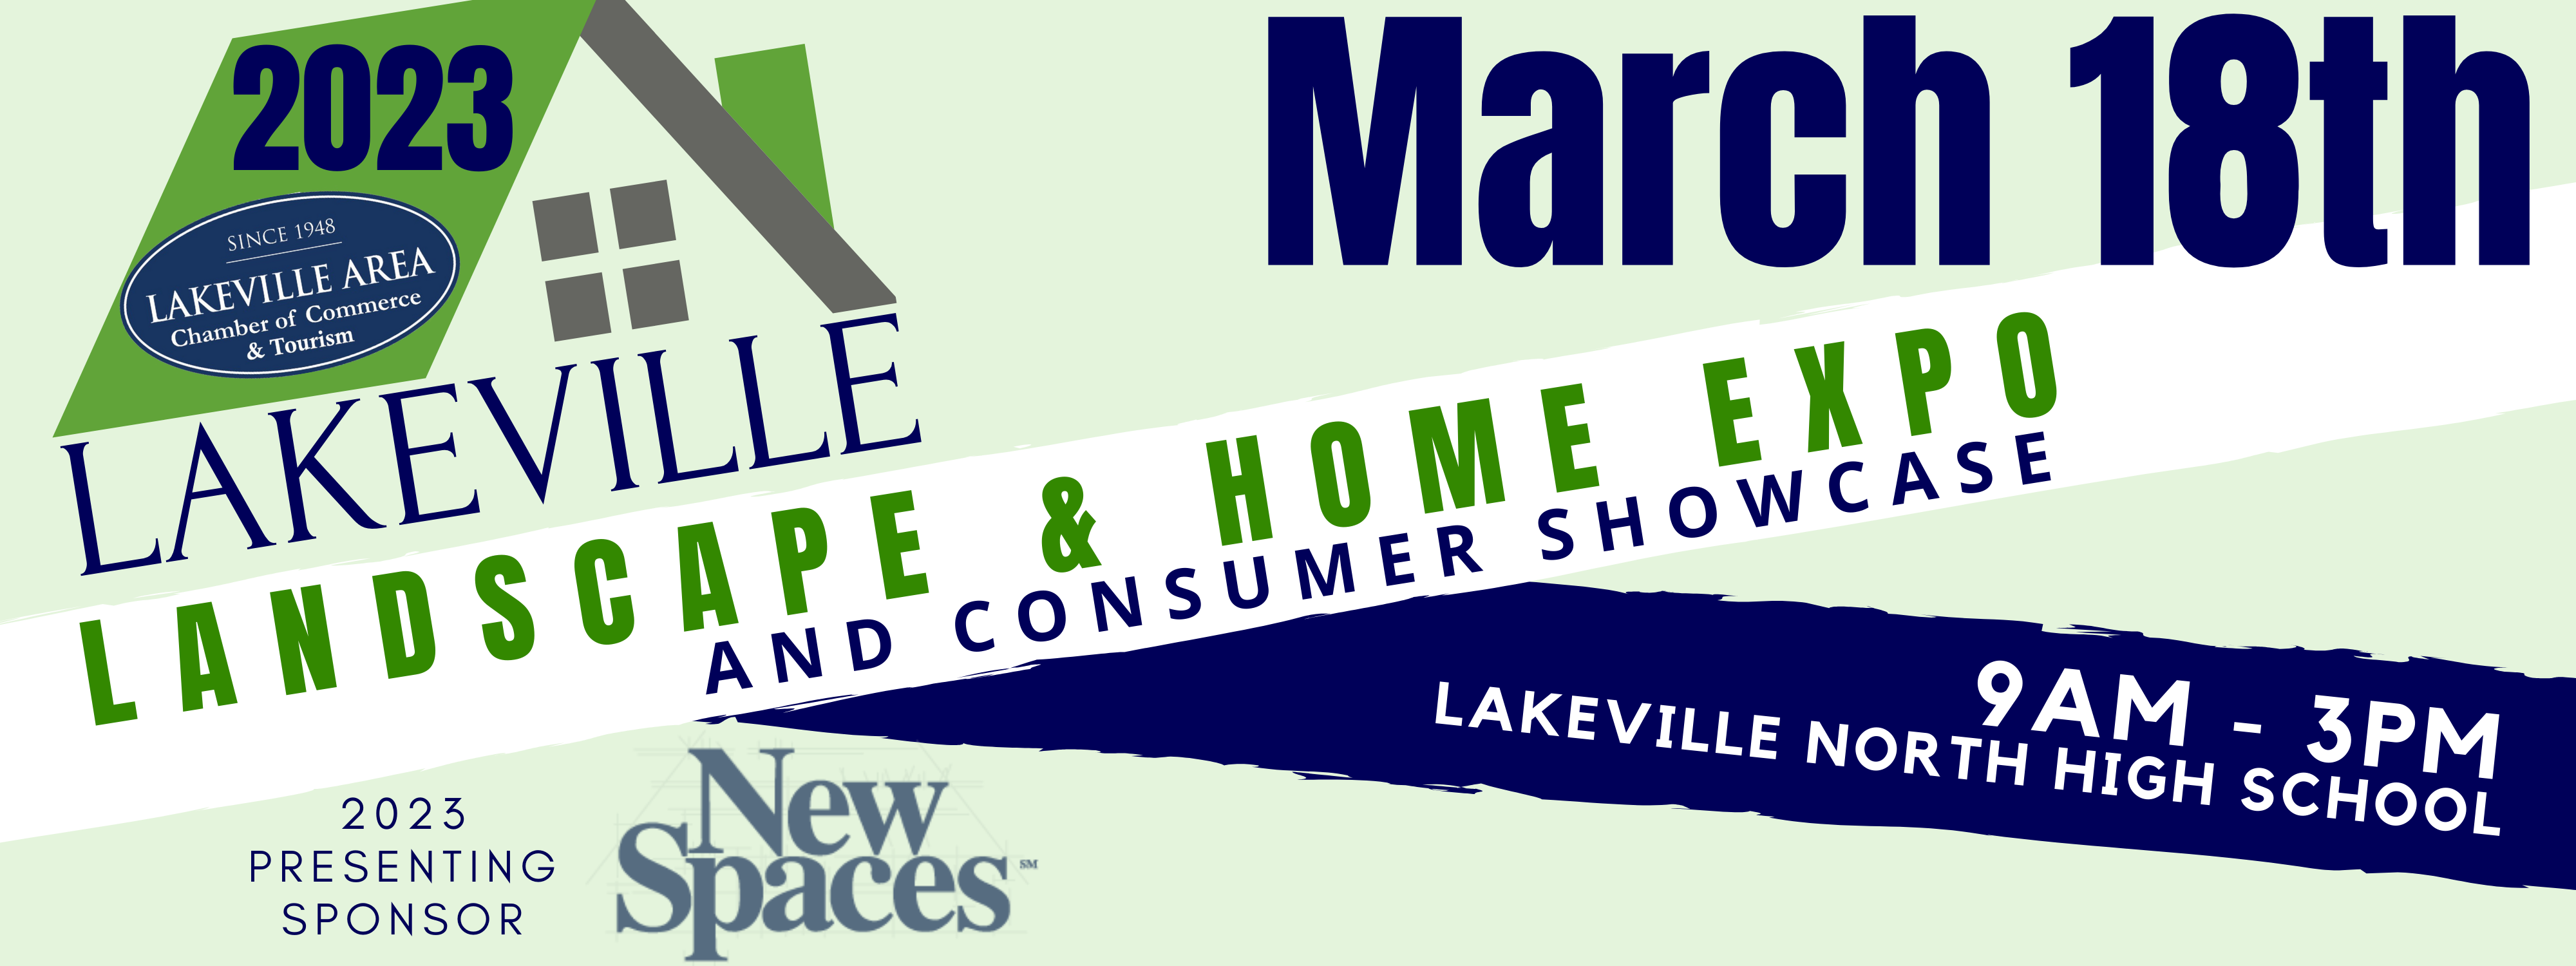 Lakeville Area Chamber of Commerce